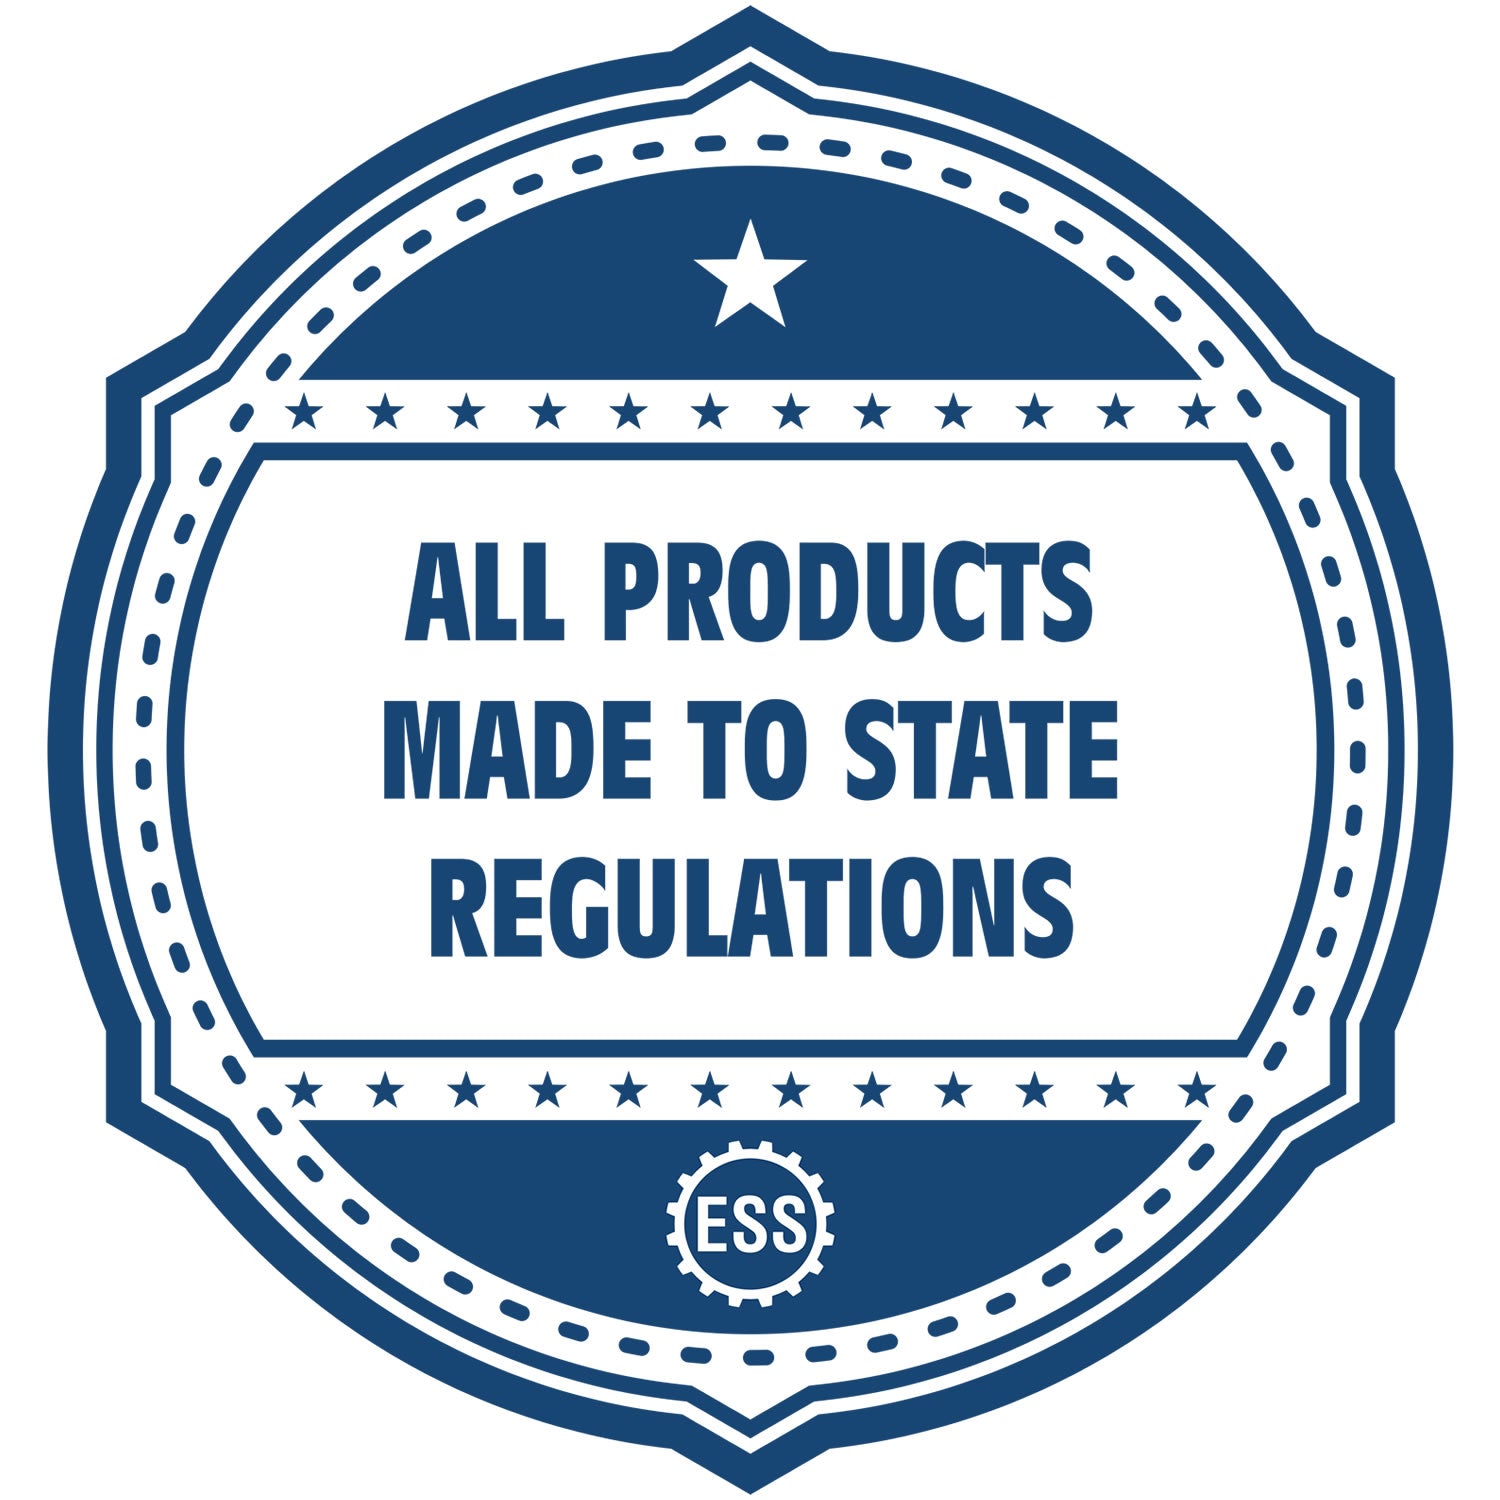 An icon or badge element for the Handheld Oklahoma Land Surveyor Seal showing that this product is made in compliance with state regulations.